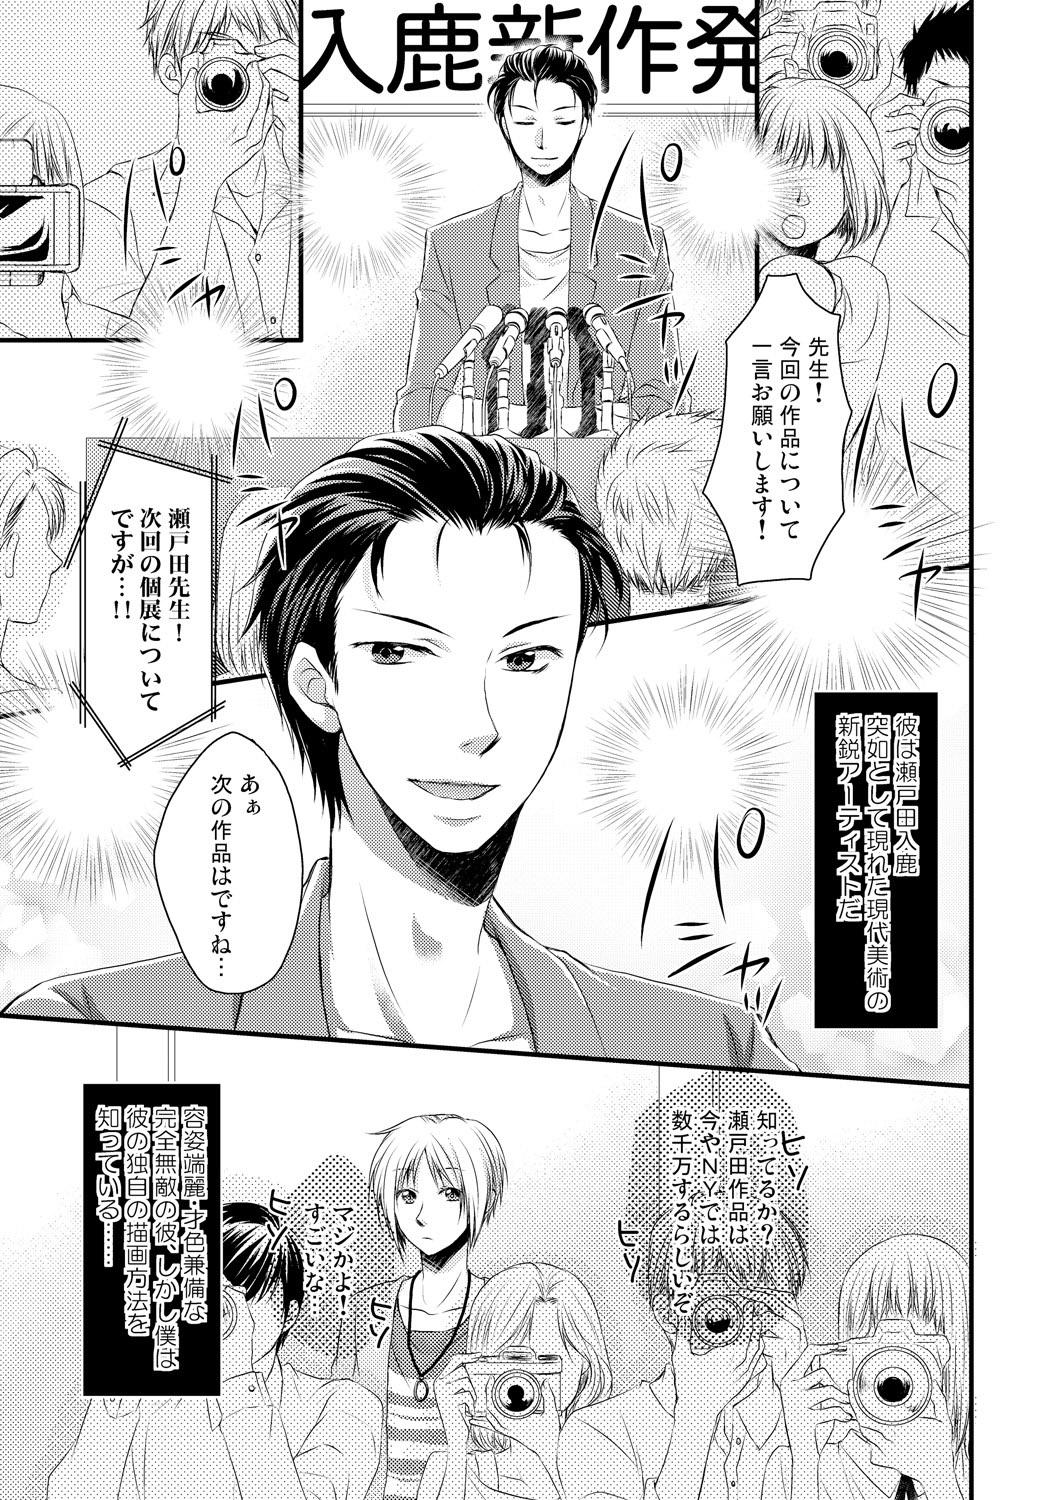 Bedroom 発情♂ゲイ術家～喘ぎアートはシモの筆で～ And - Page 4